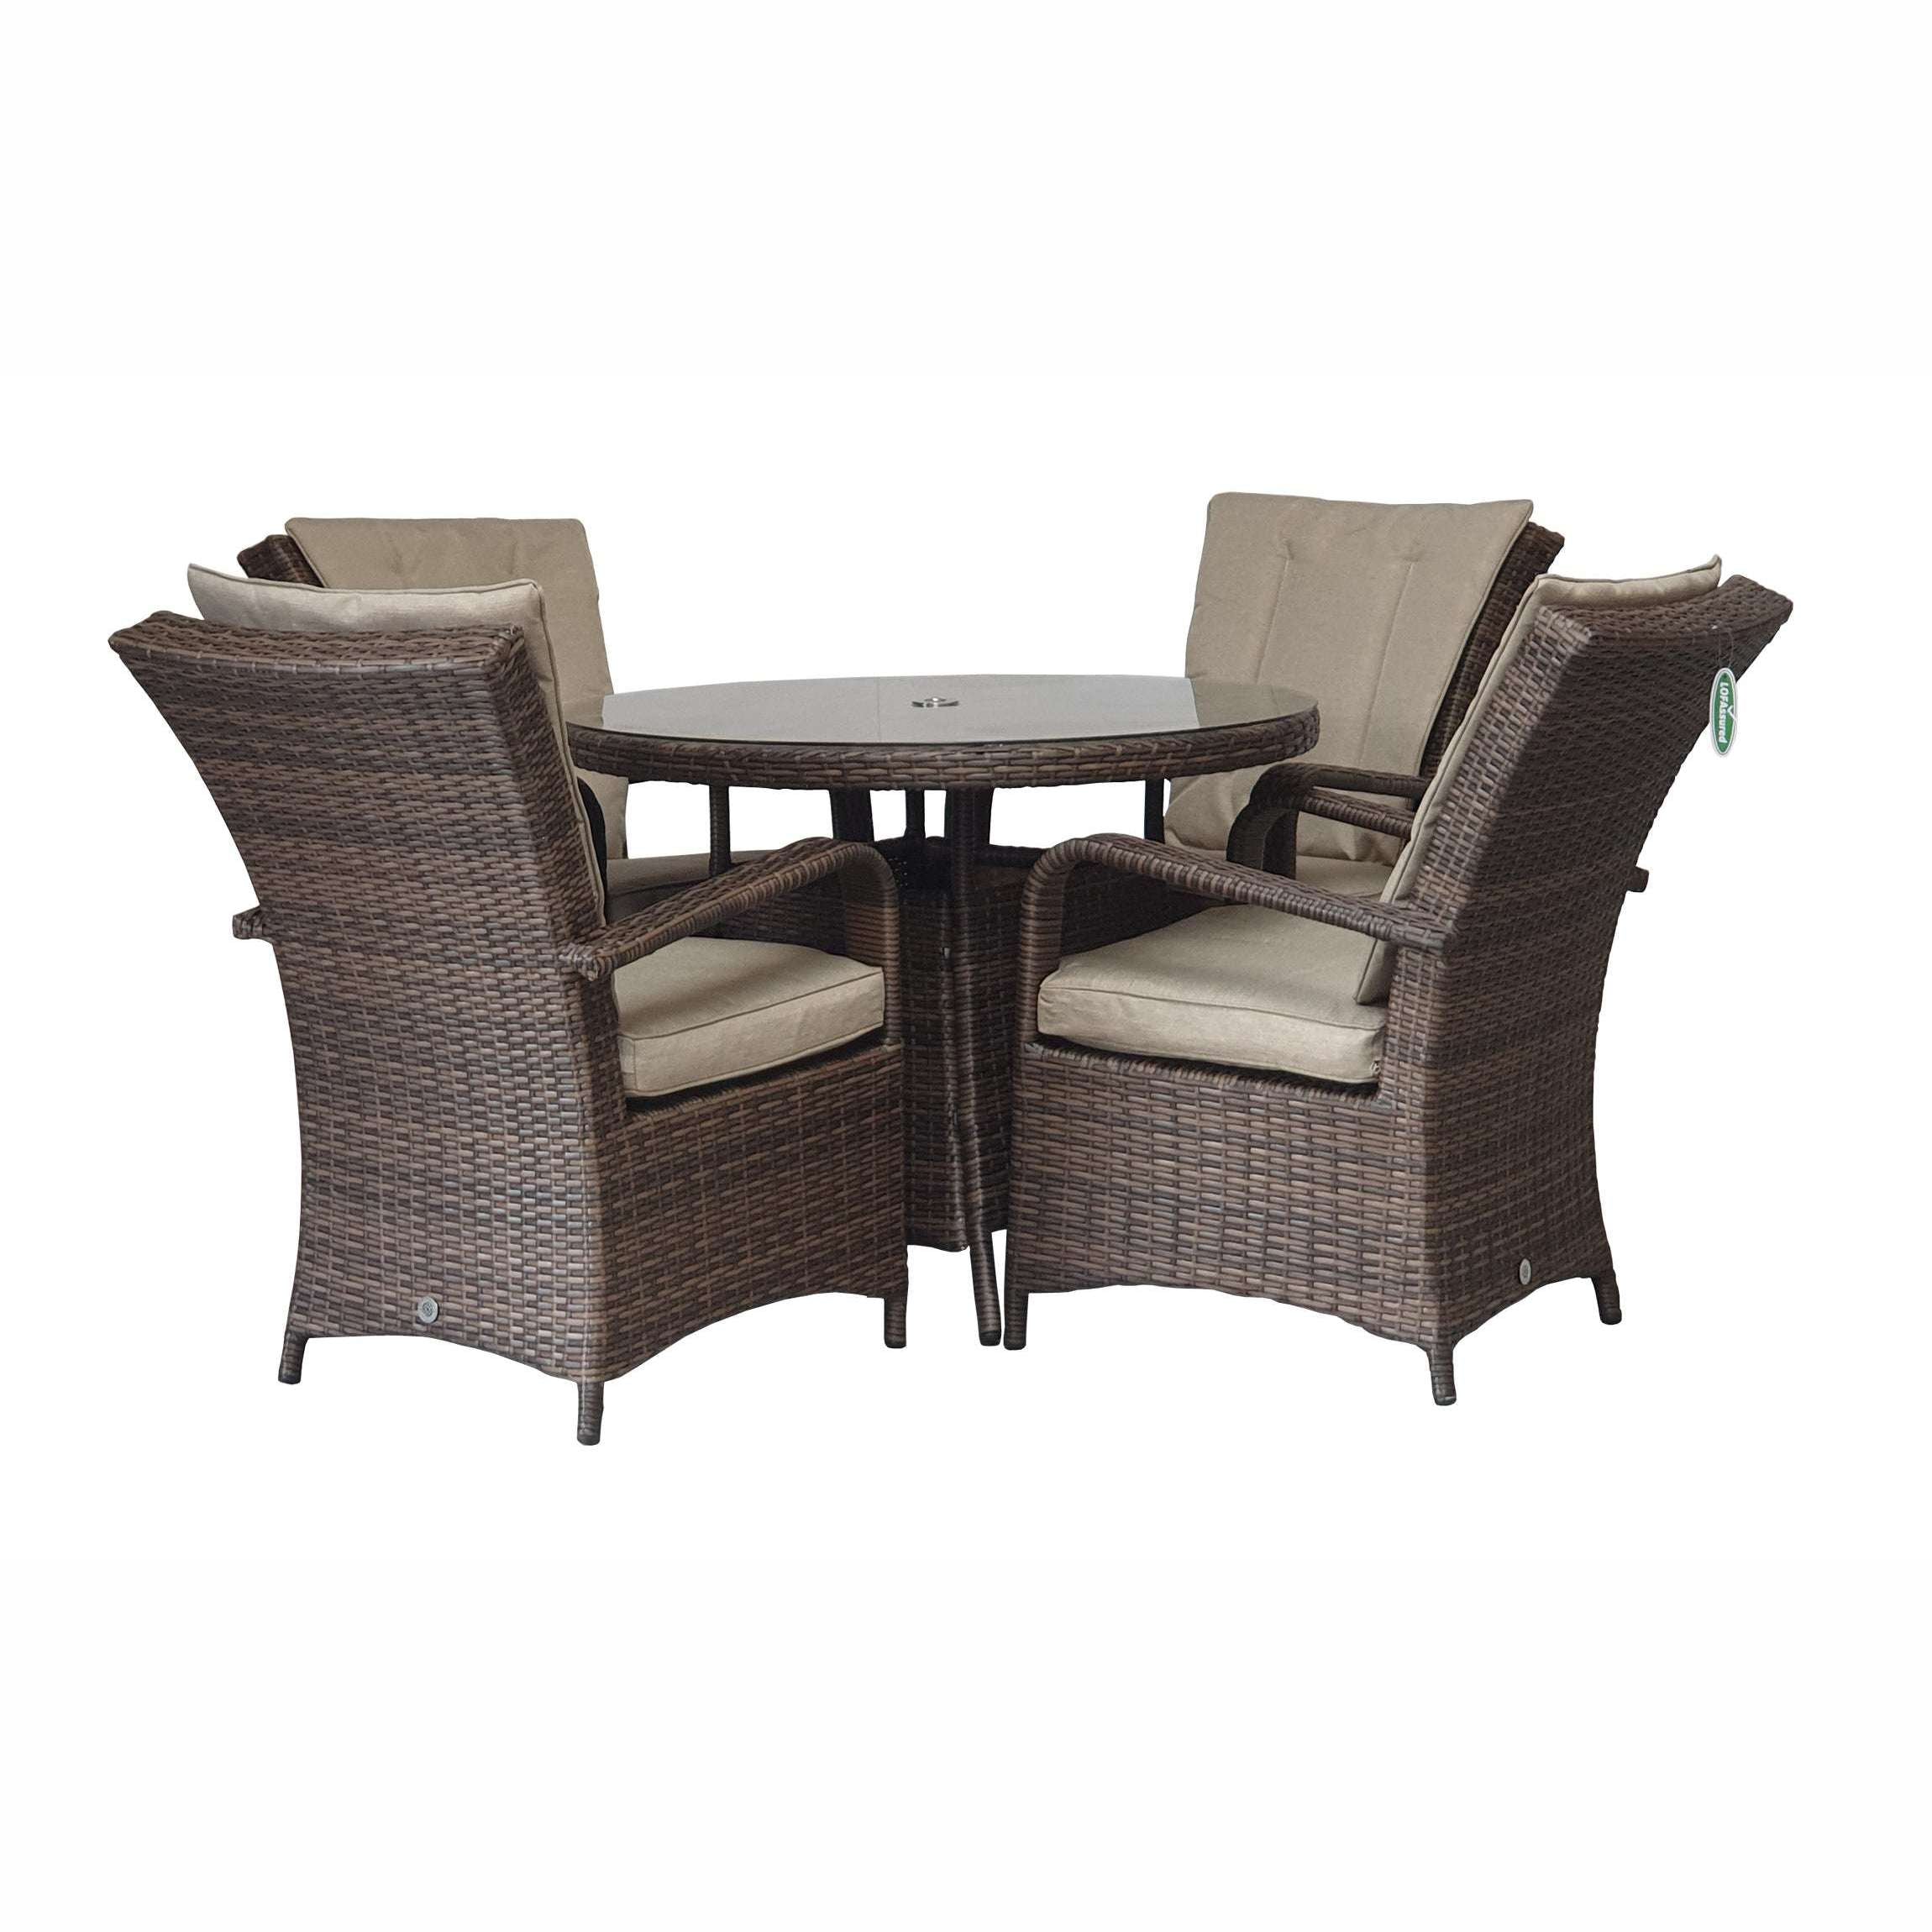 Exceptional Garden:Signature Weave Florence 4-Seater Round Dining Set - Brown